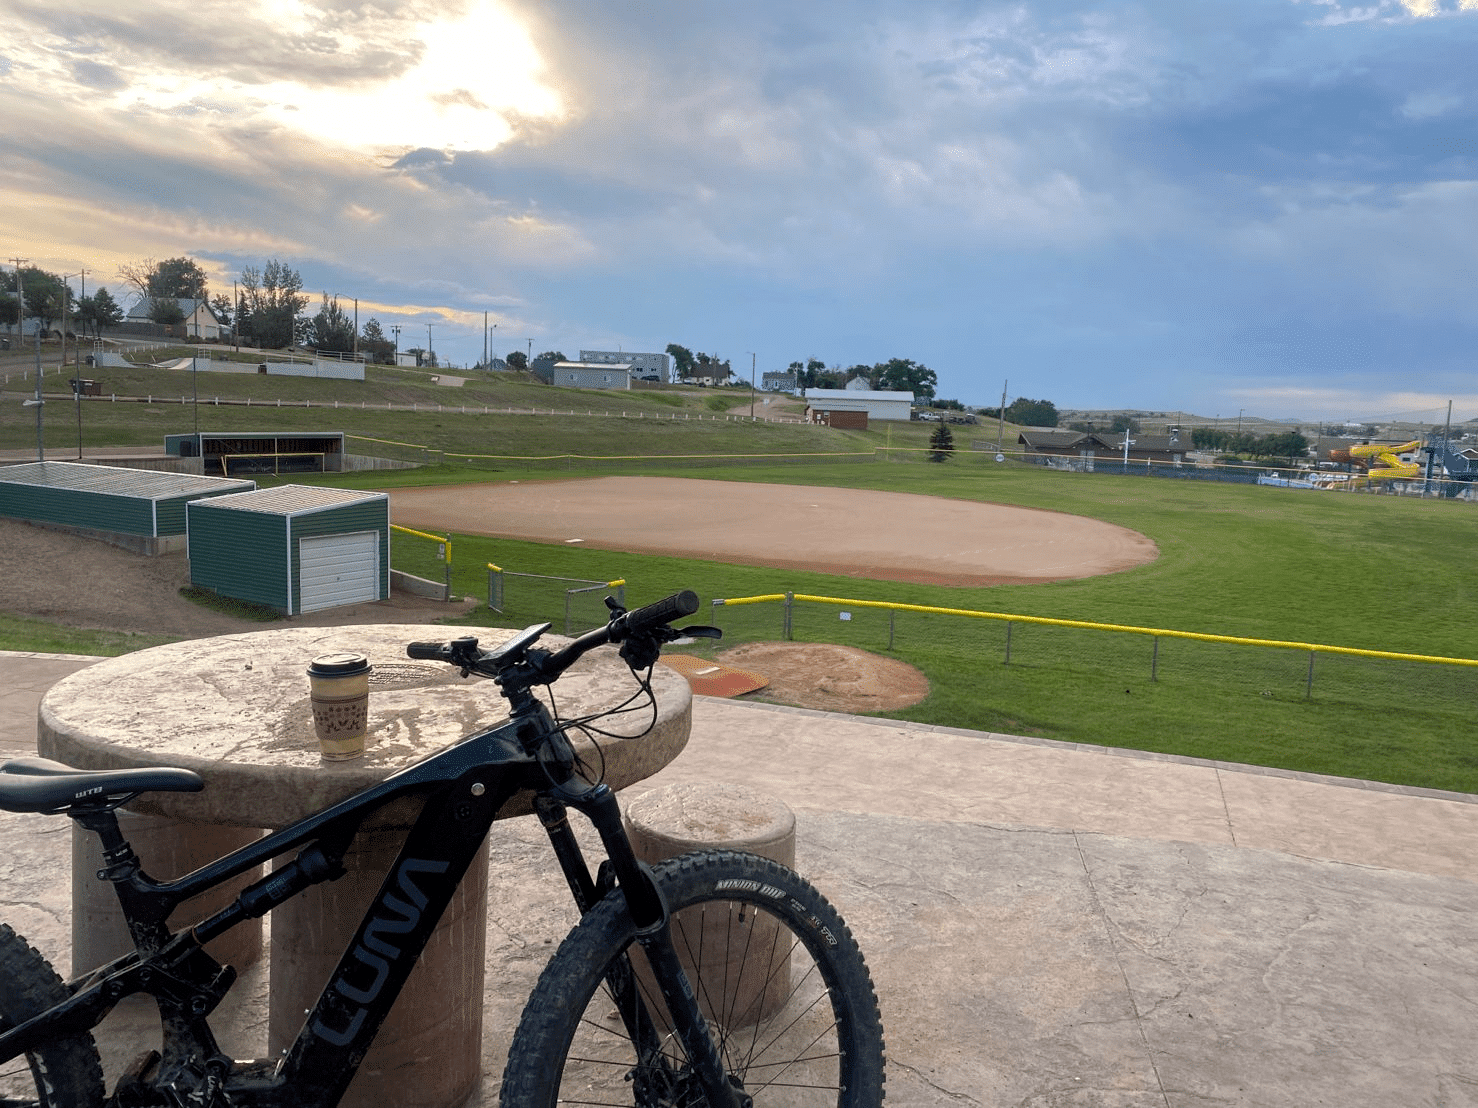 Bike and a to-go coffee at a table overlooking a baseball field